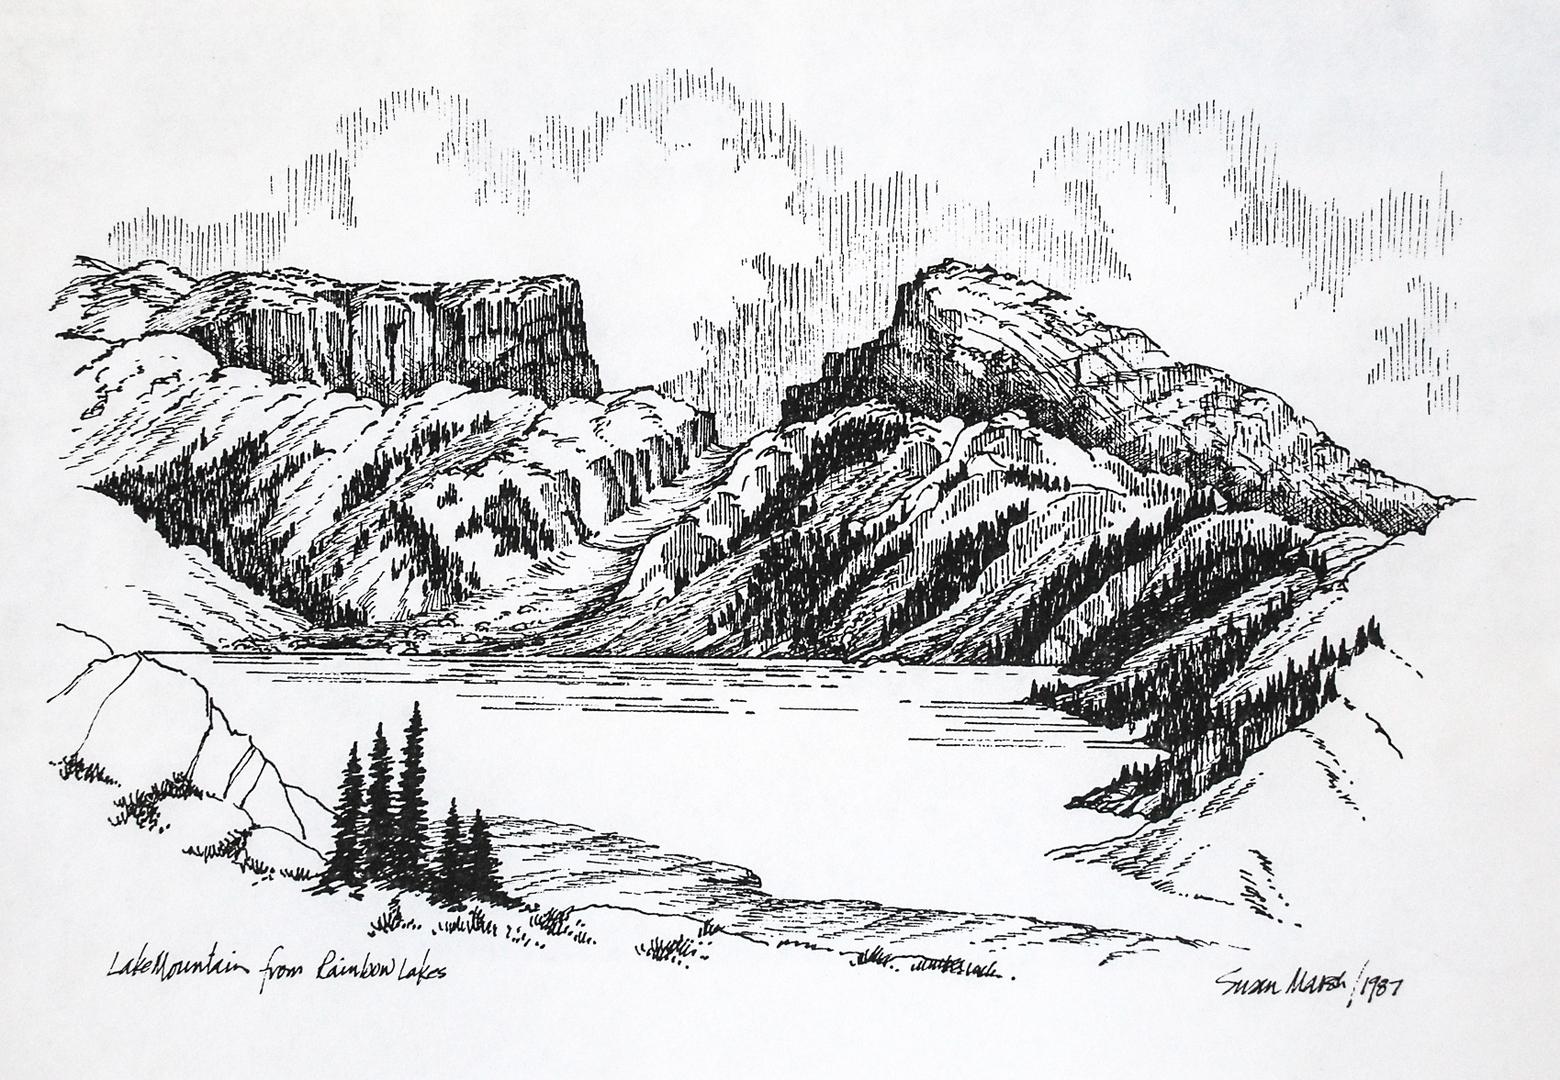 "Lake Mountain from Rainbow Lakes." Susan Marsh's sketch from 1987 embodies the bliss she finds in the mountains, a feeling that nature and art can acutely give rise to.